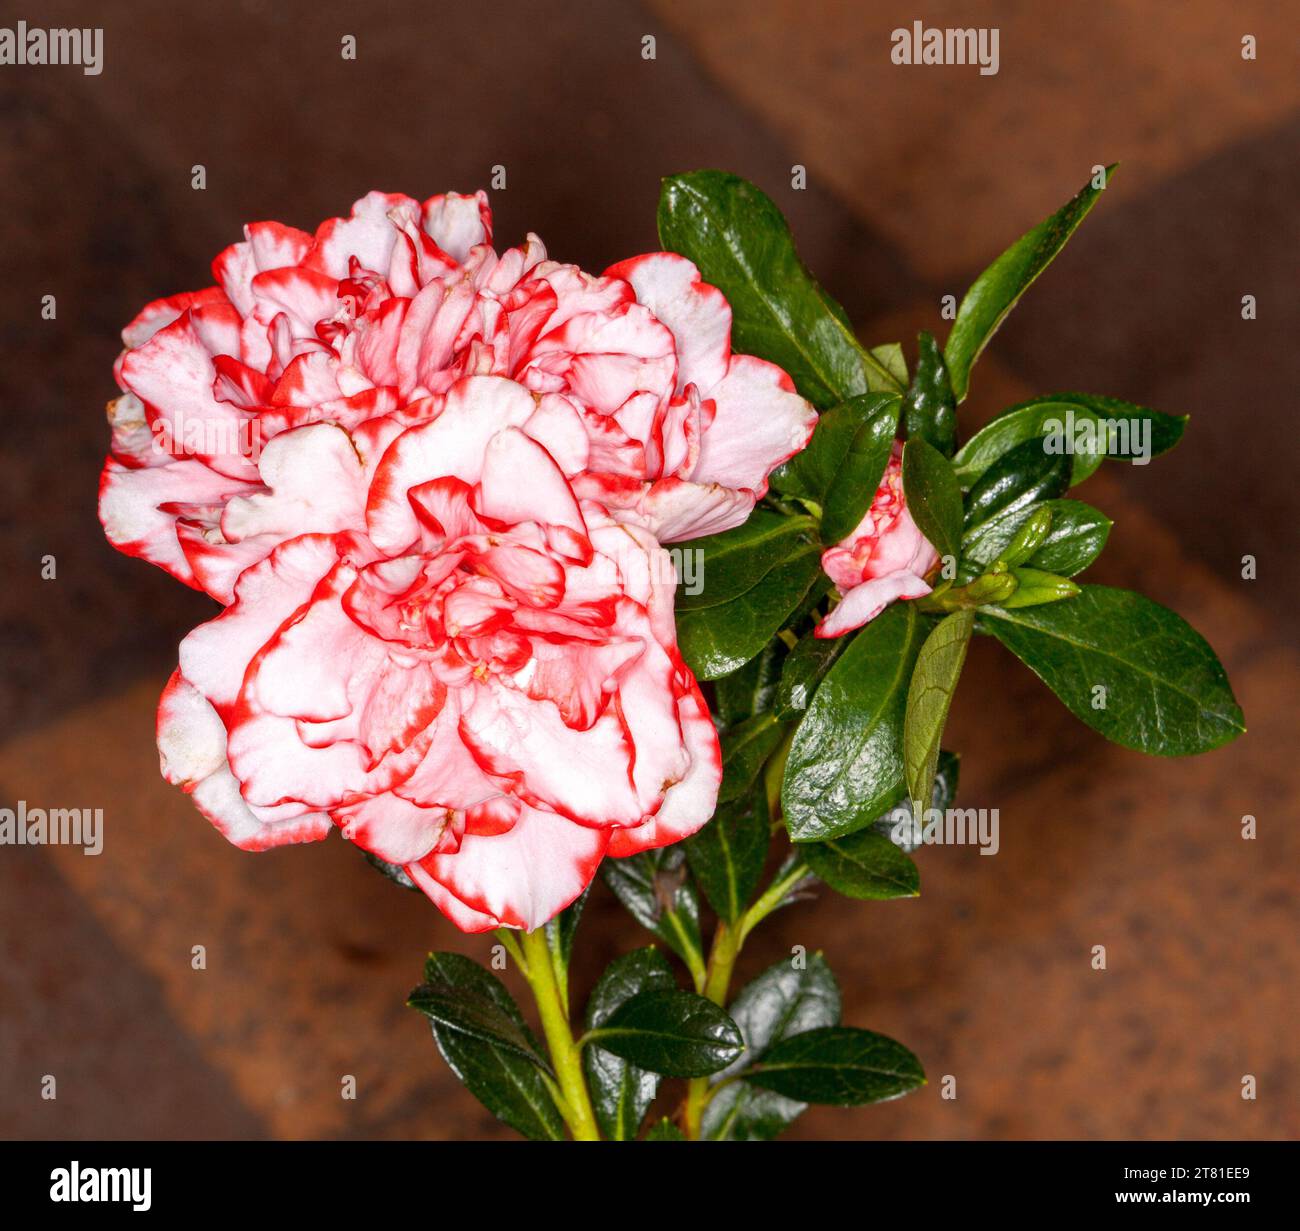 Spectacular pink and white streaked flowers and dark green foliage of Azalea indica 'Nice Surprise' against brown background - in Australia Stock Photo